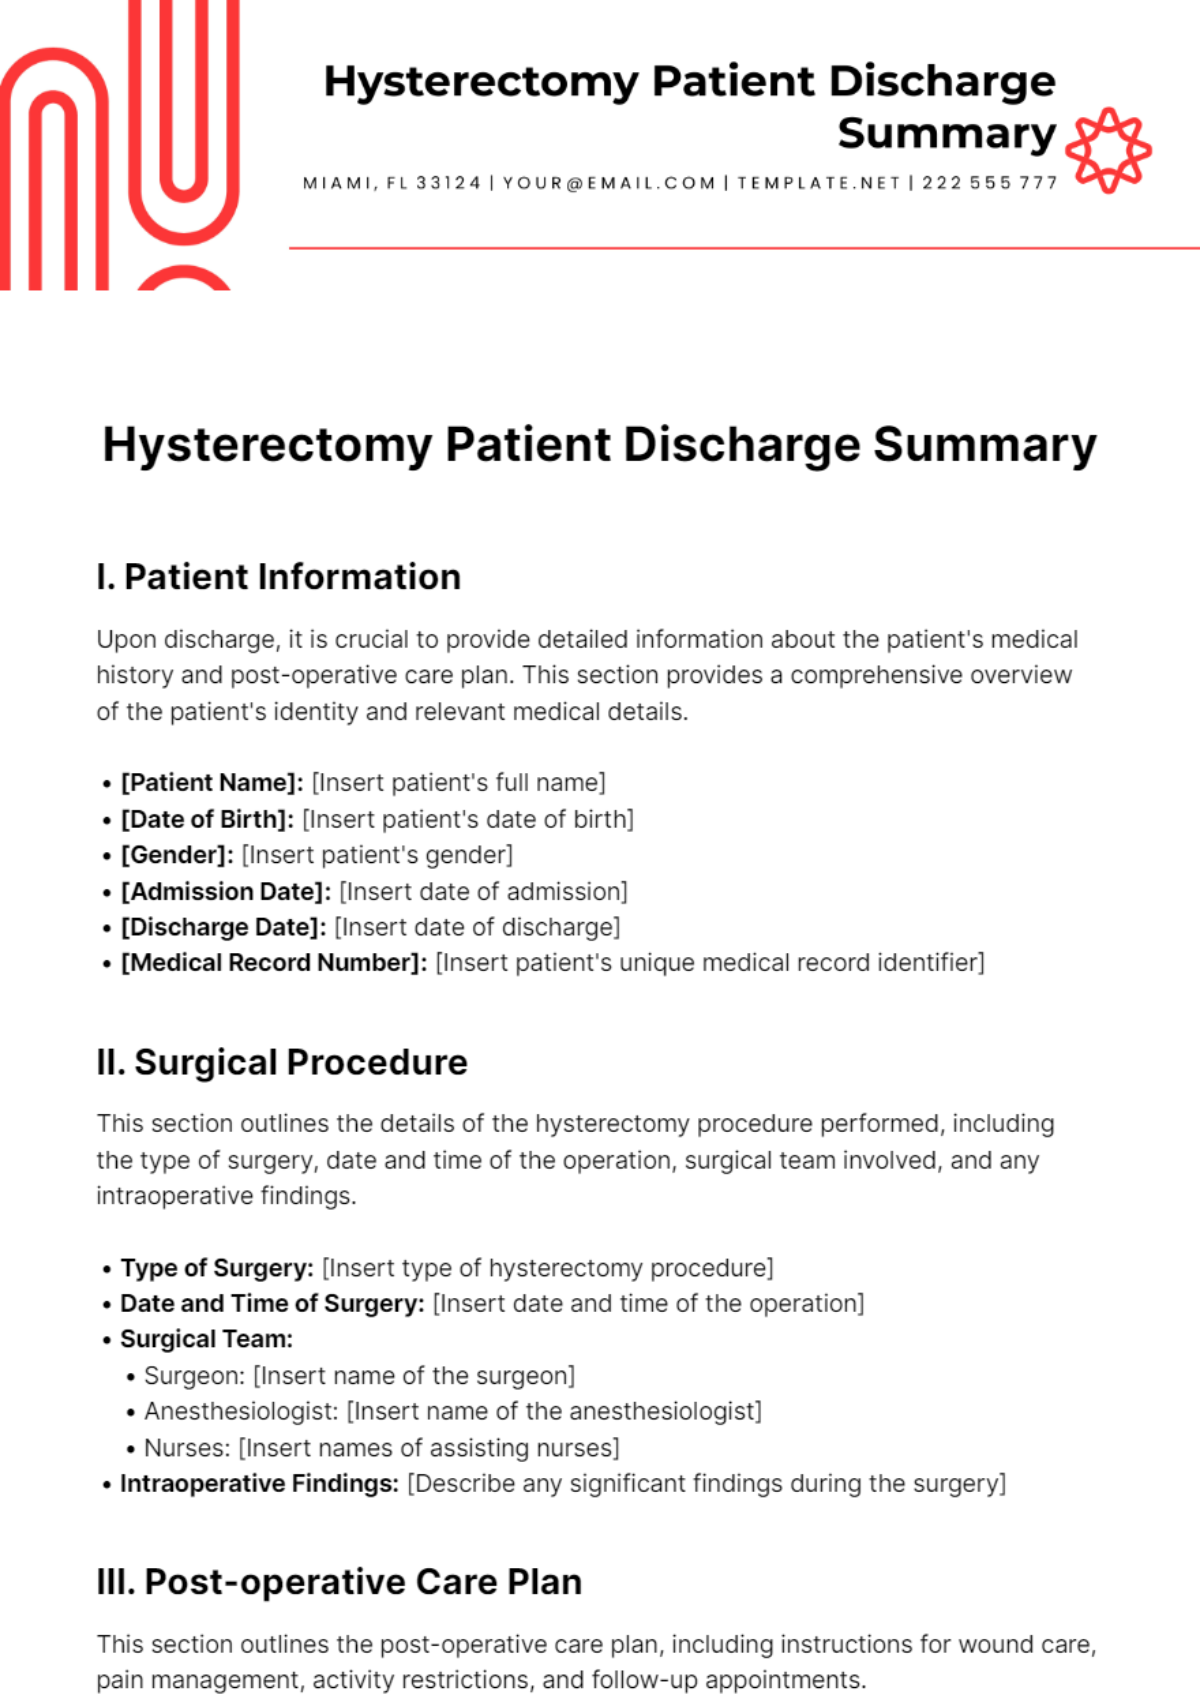 Hysterectomy Patient Discharge Summary Template